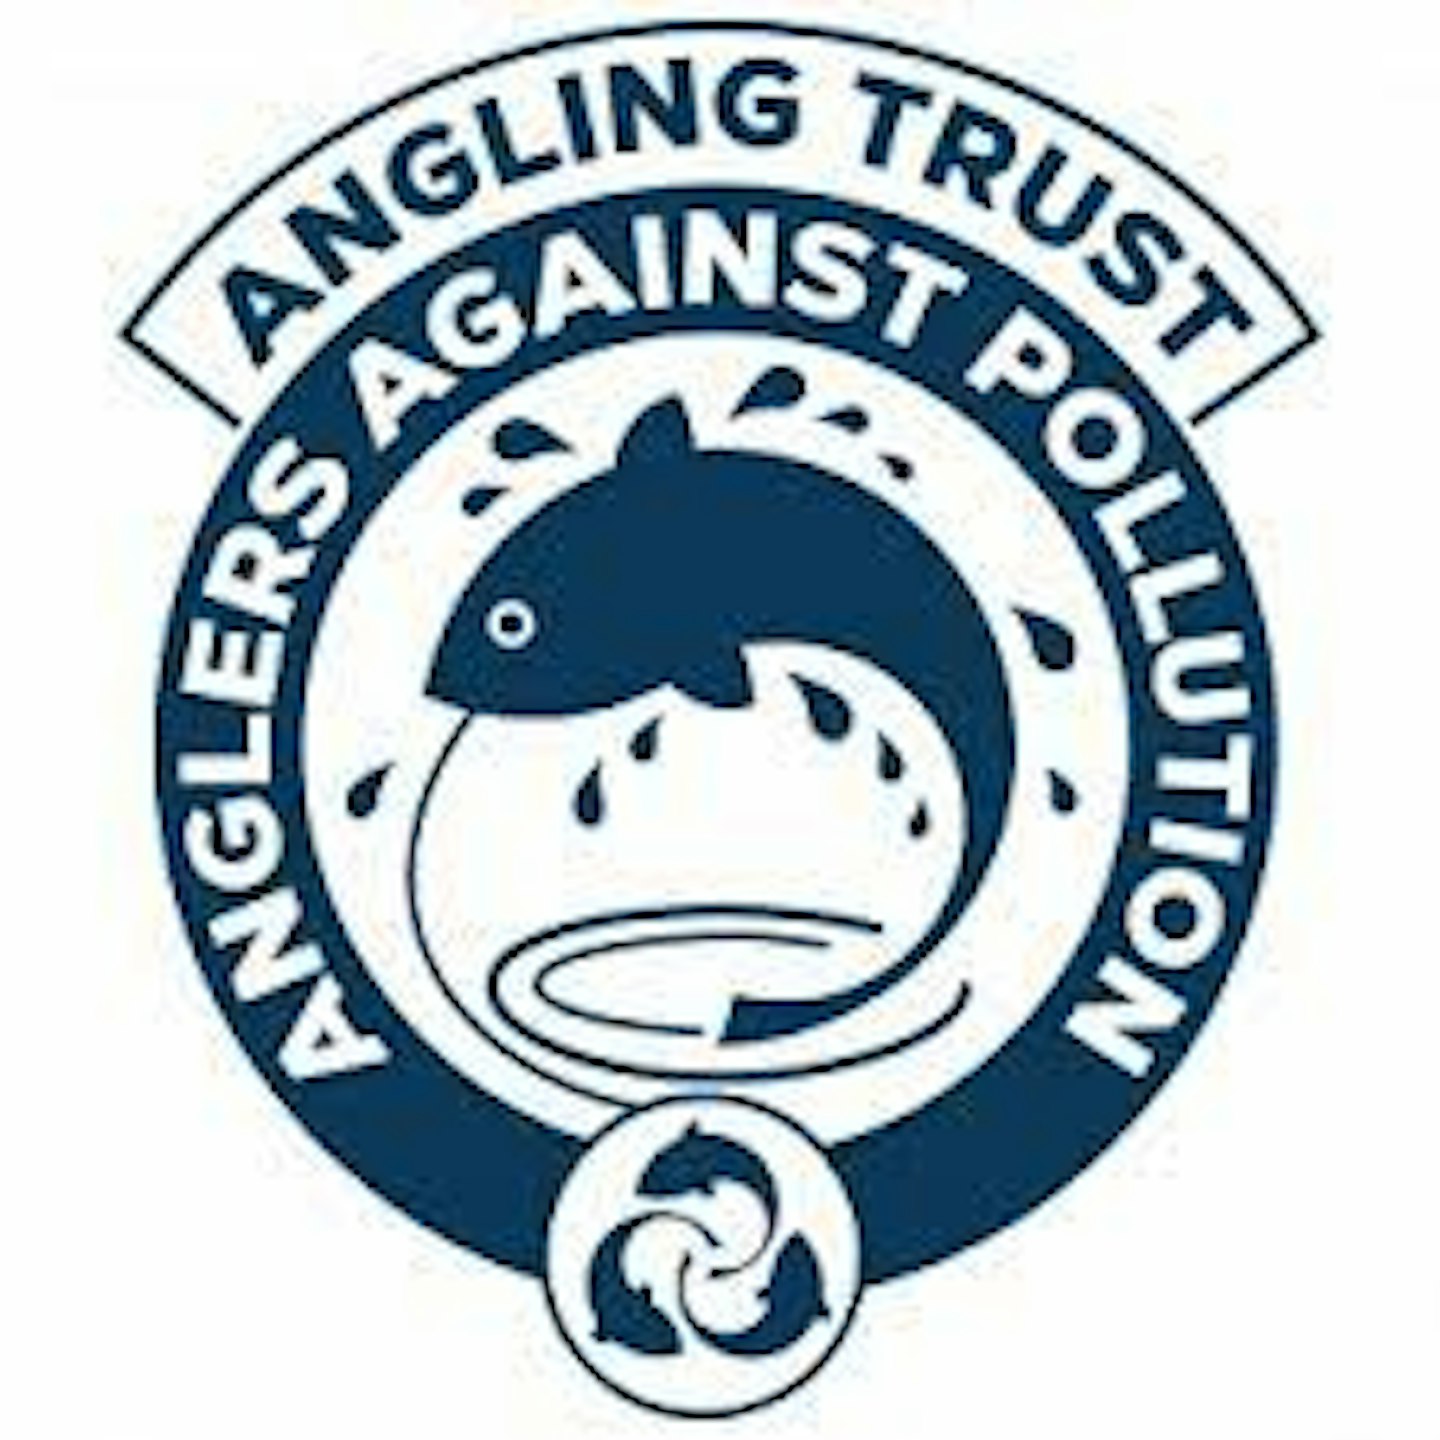 Angling Trust Anglers Against Pollution